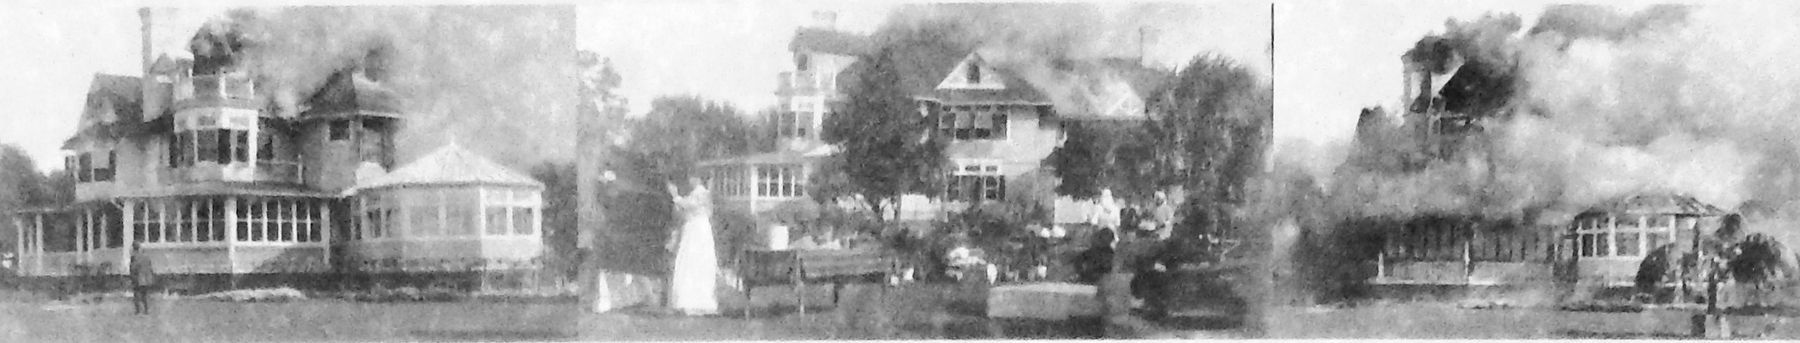 Marker detail: Solterra Cottage Fire, March 9, 1914 image. Click for full size.